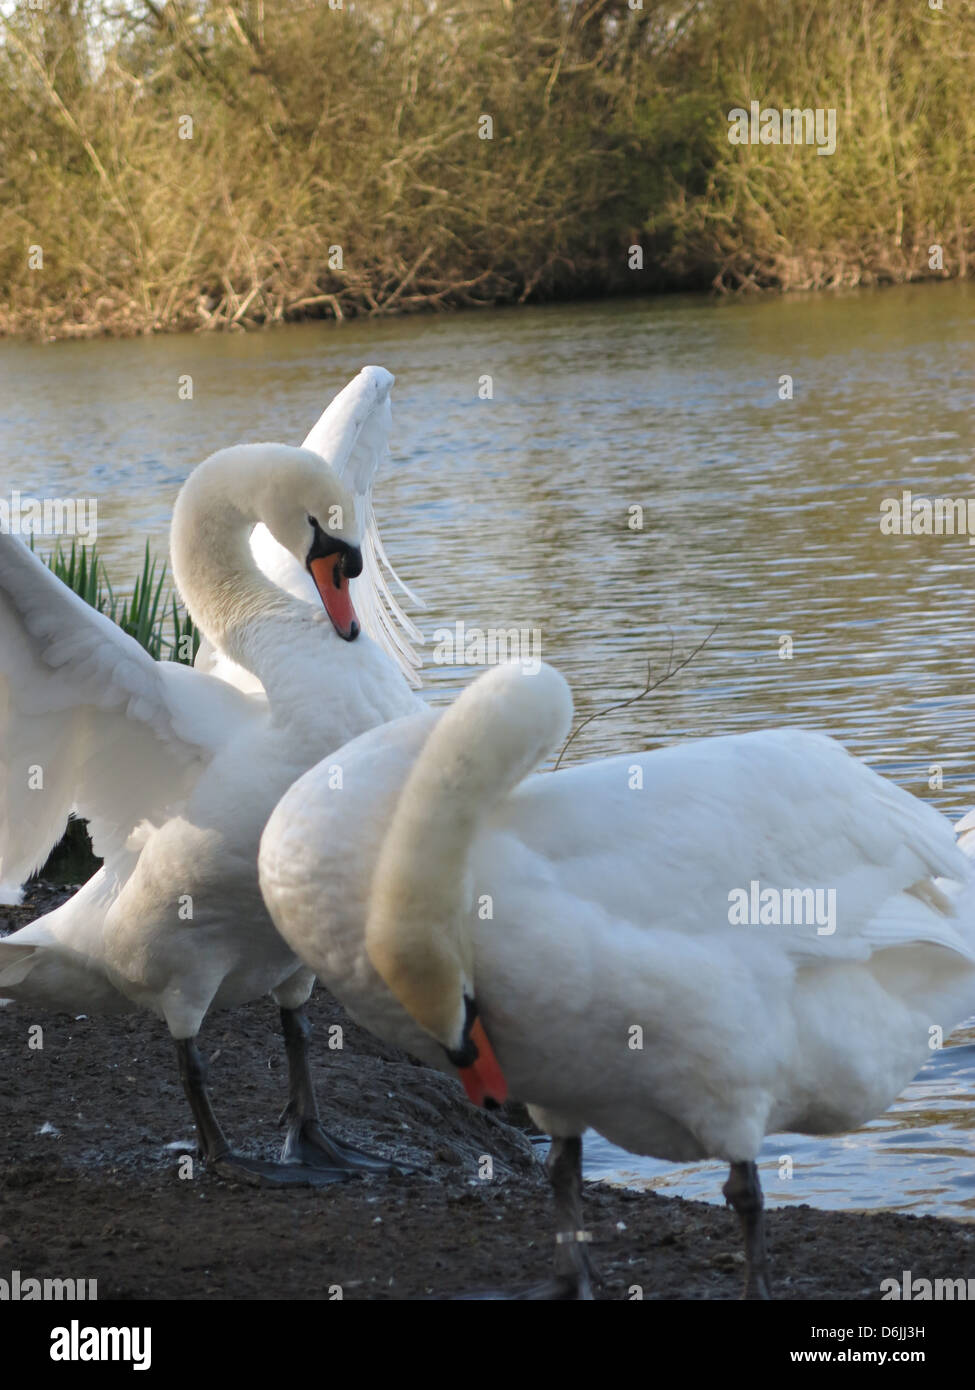 Two Swans By The River Thames, Reading, Berkshire. Stock Photo